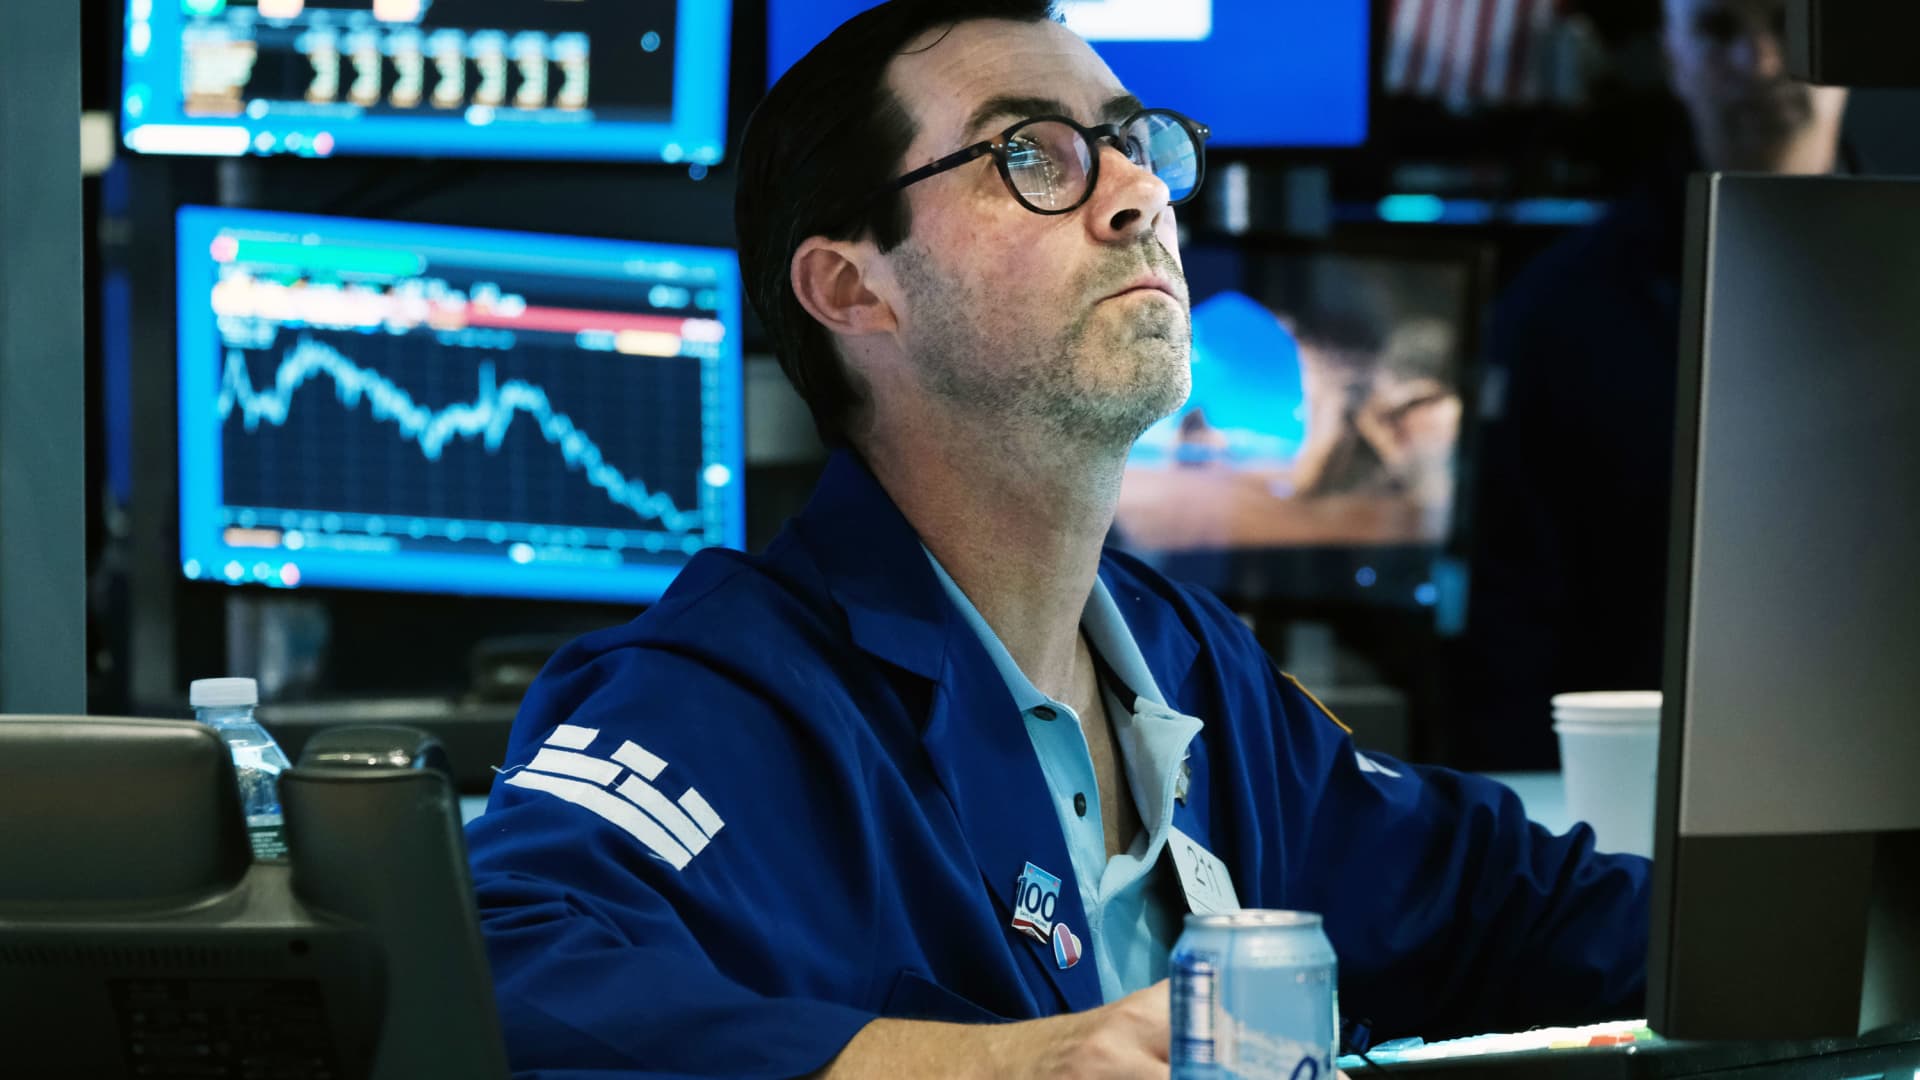 Dow falls 300 points as Wall Street sell-off continues